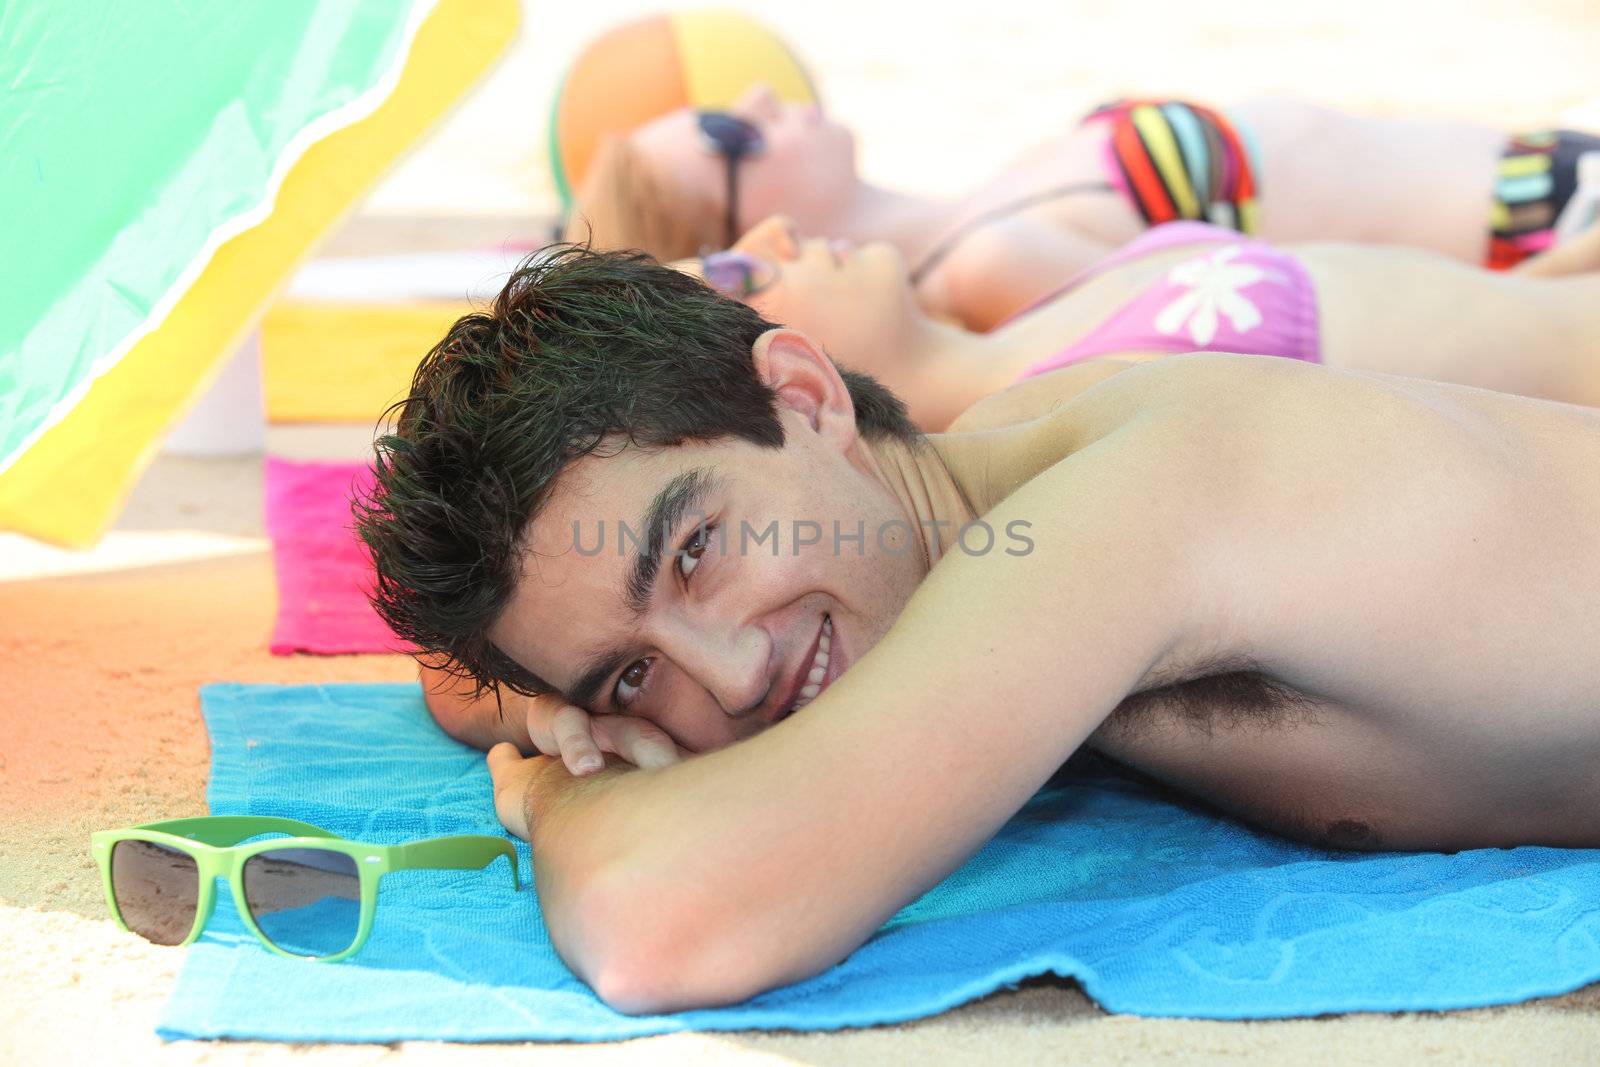 Three young people sunbathing by phovoir